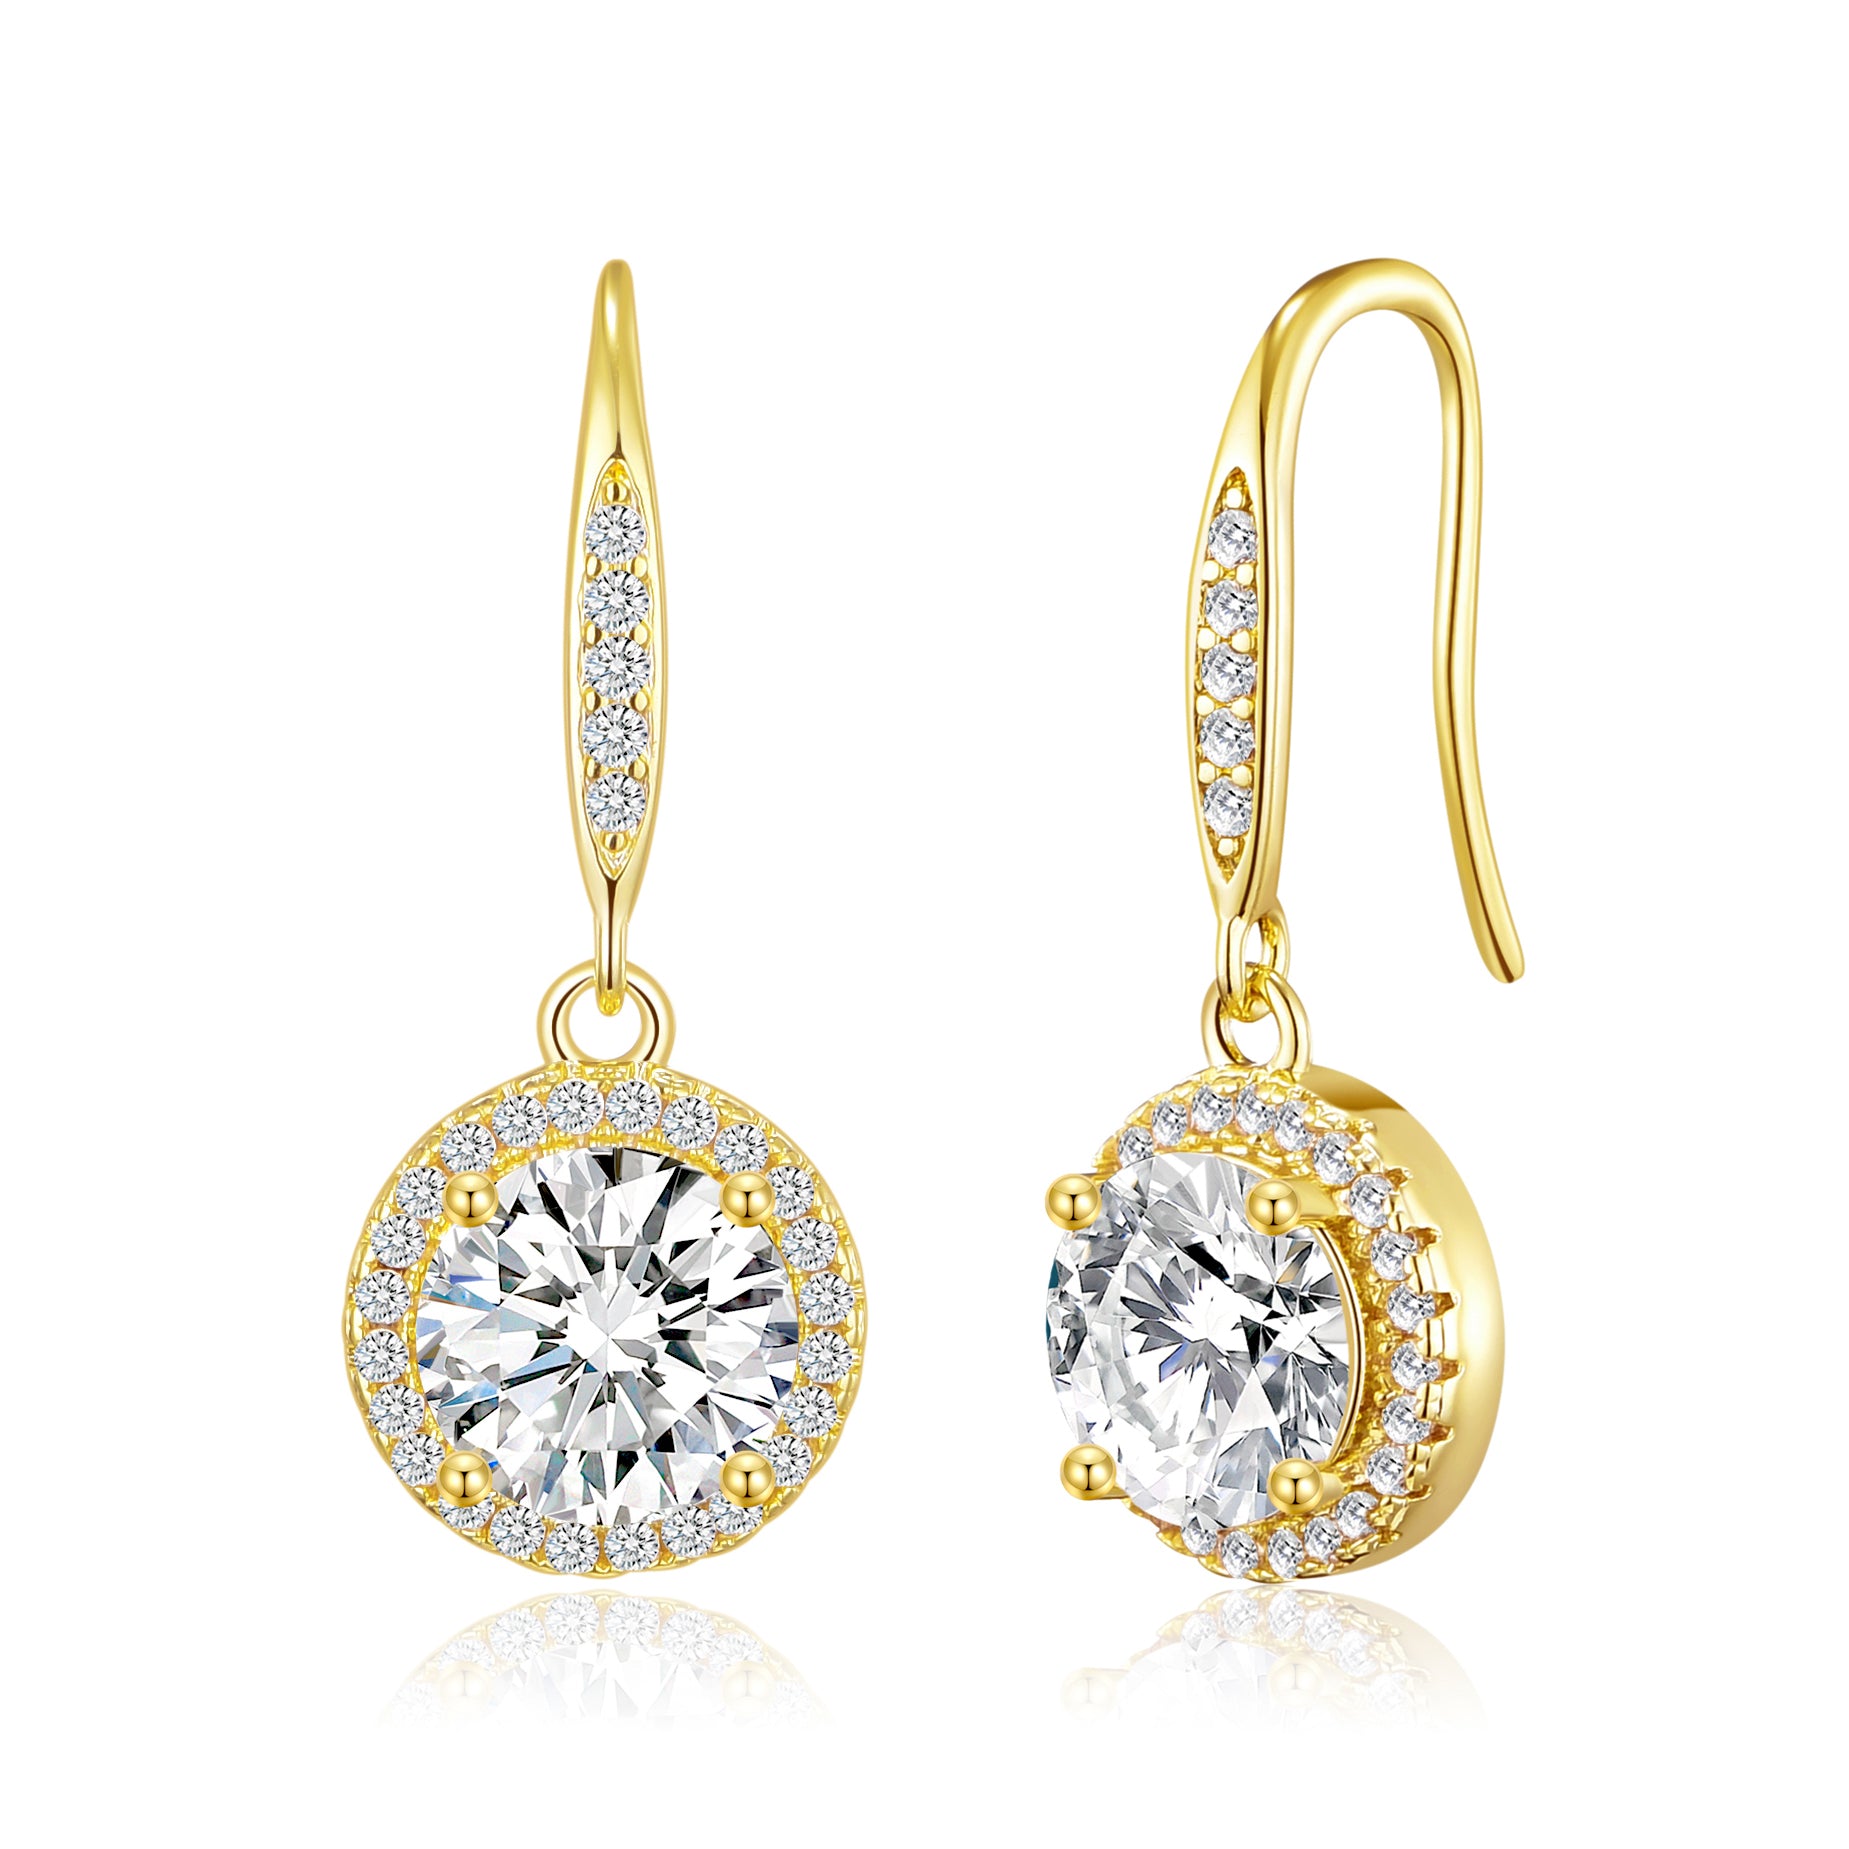 Gold Plated Halo Drop Earrings Created with Zircondia® Crystals by Philip Jones Jewellery